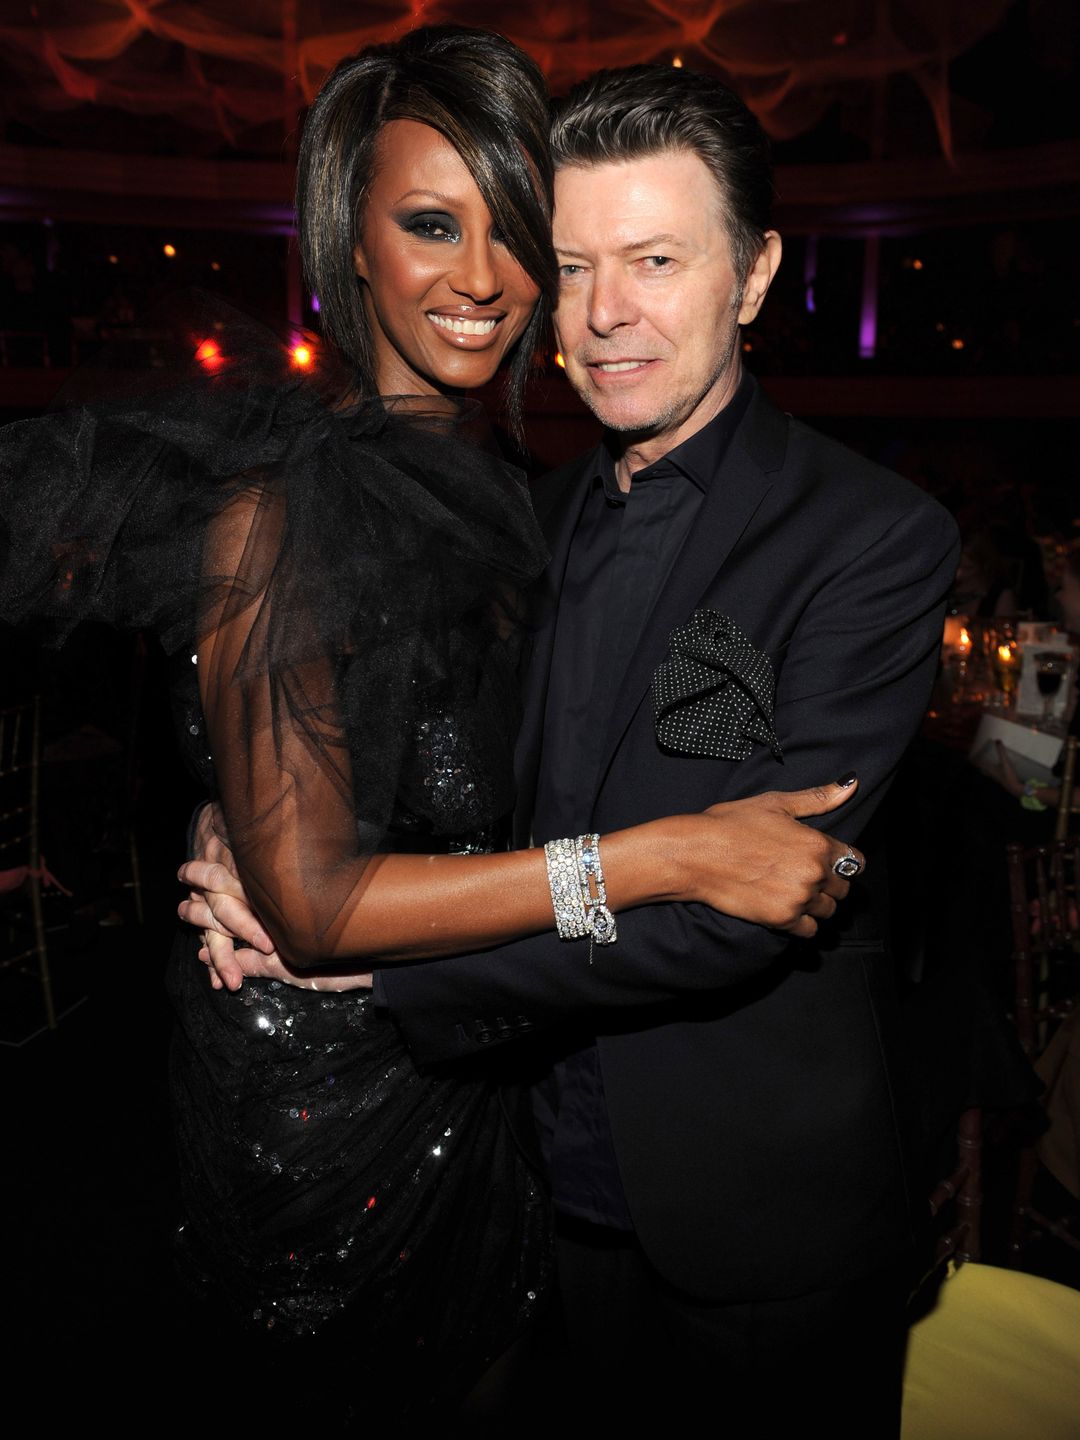 Iman and David Bowie hugging in black outifts